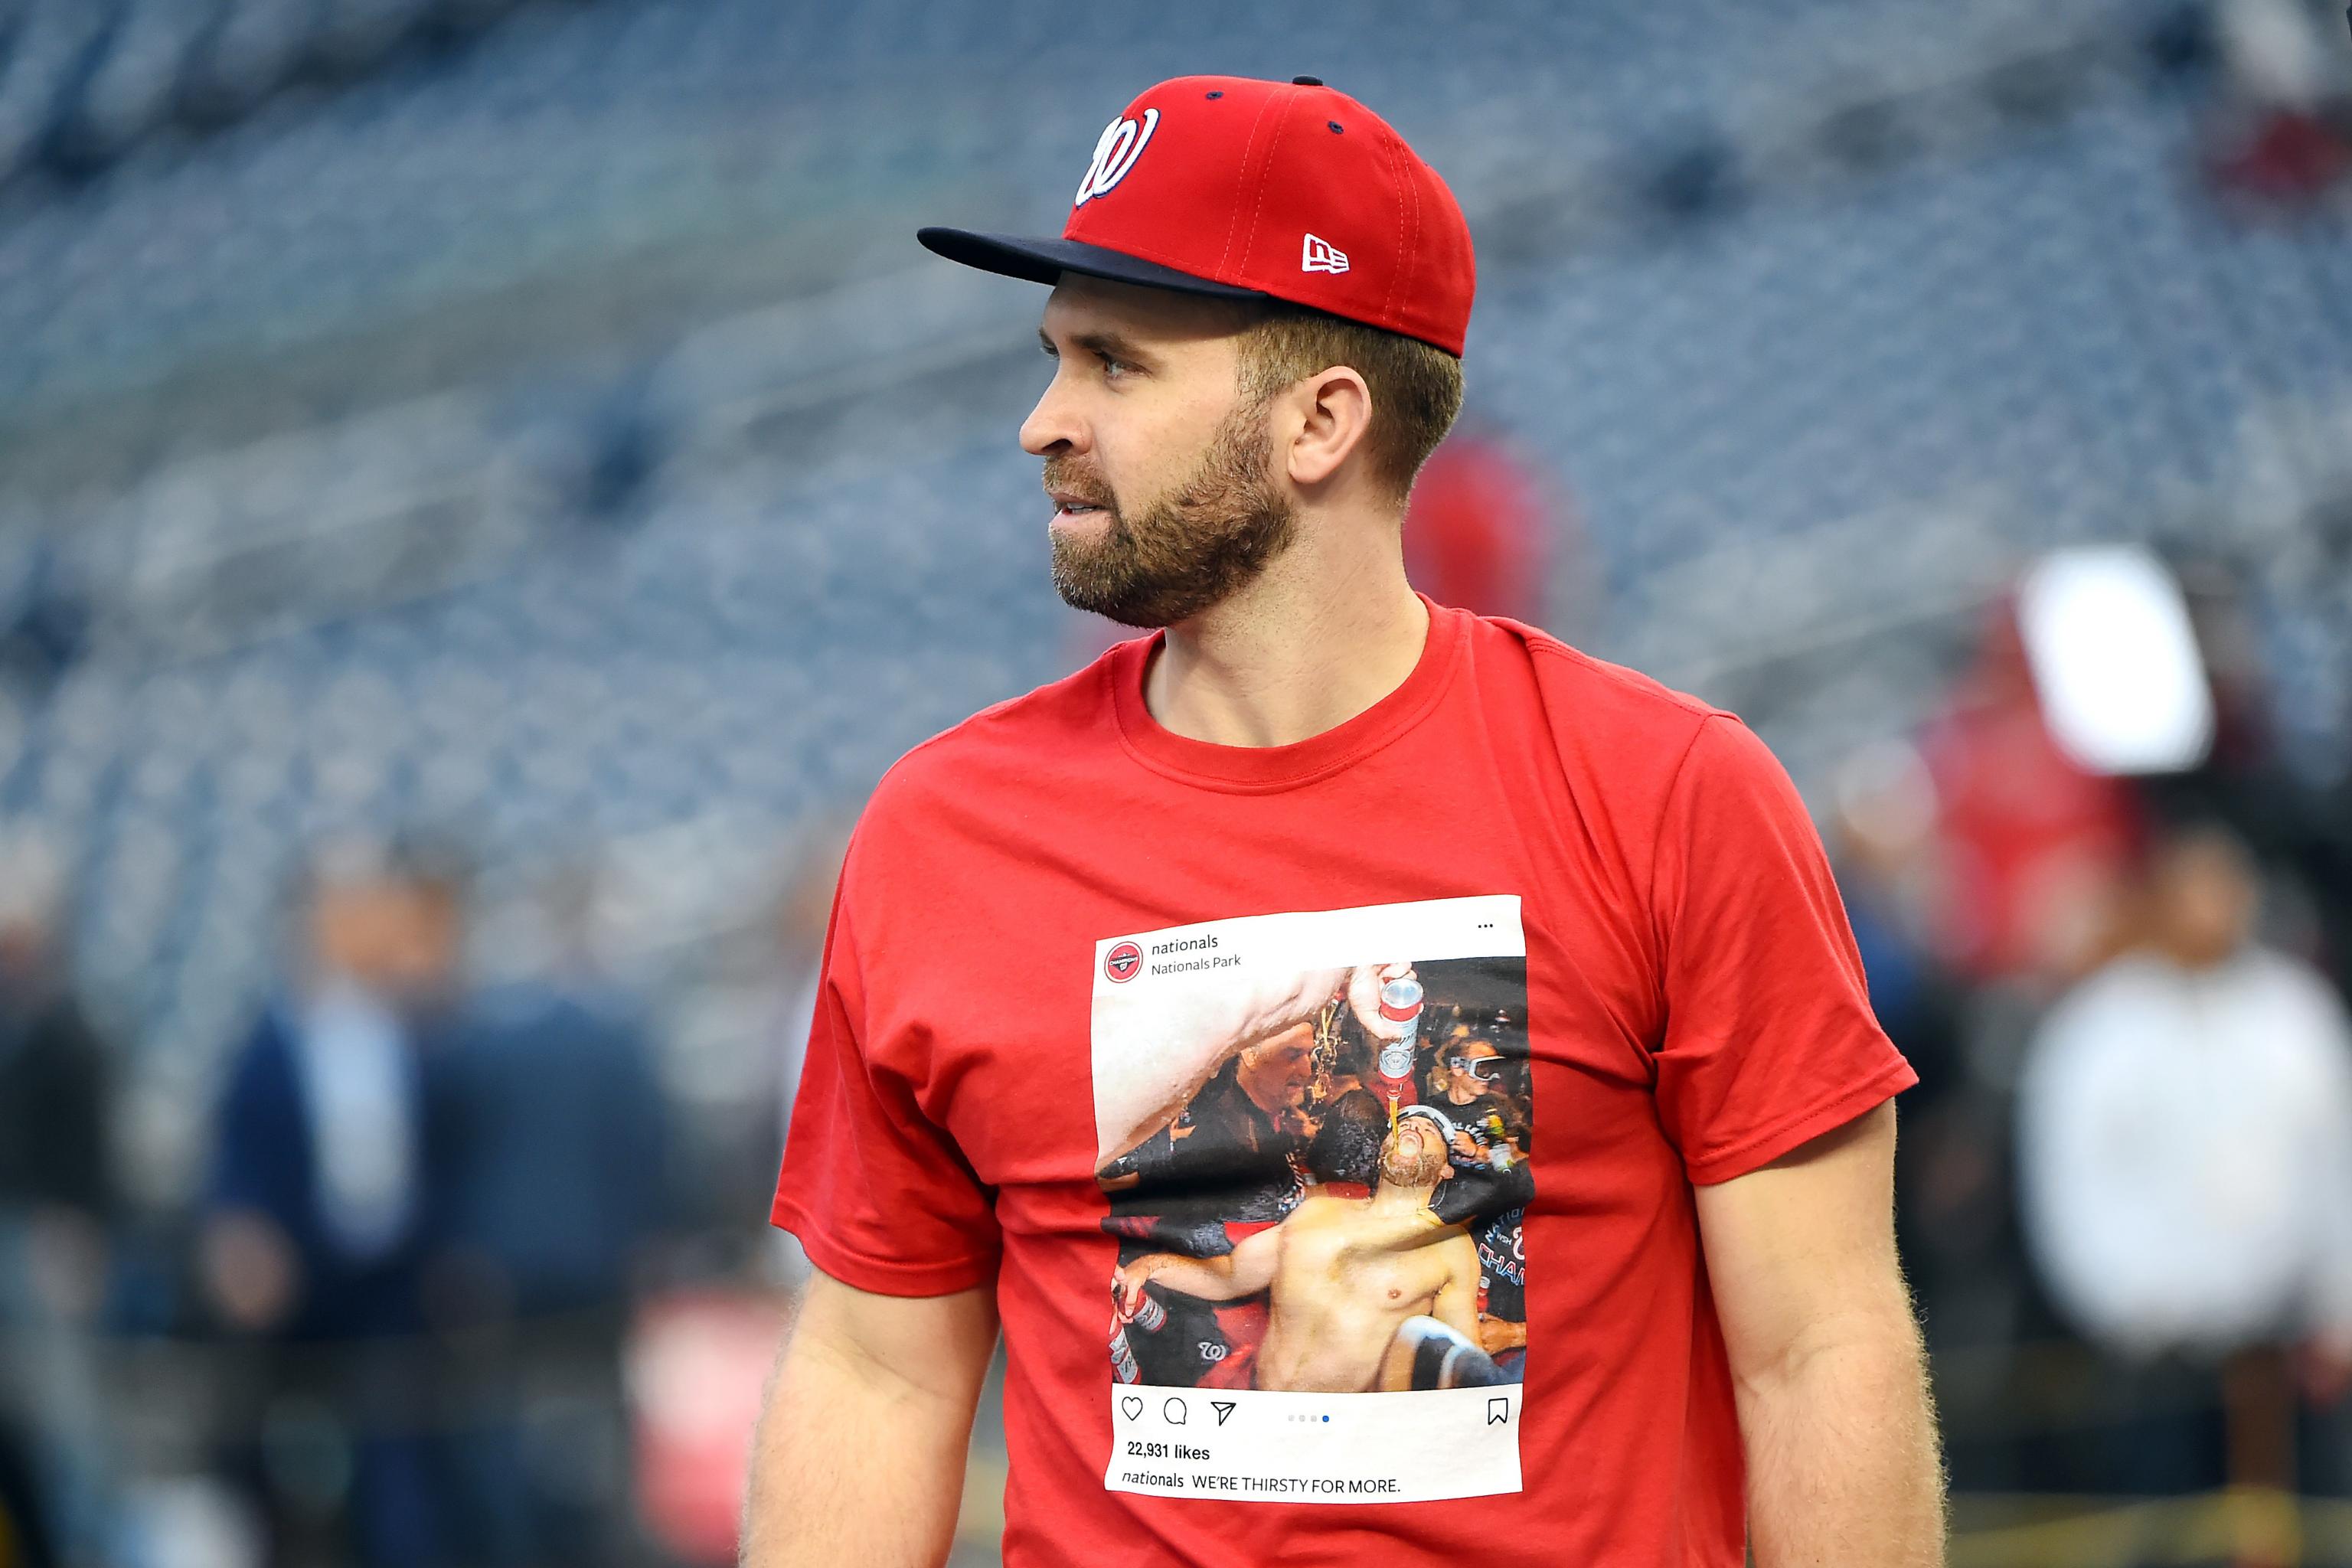 Brian Dozier agrees to deal with Washington Nationals according to sources  - ESPN